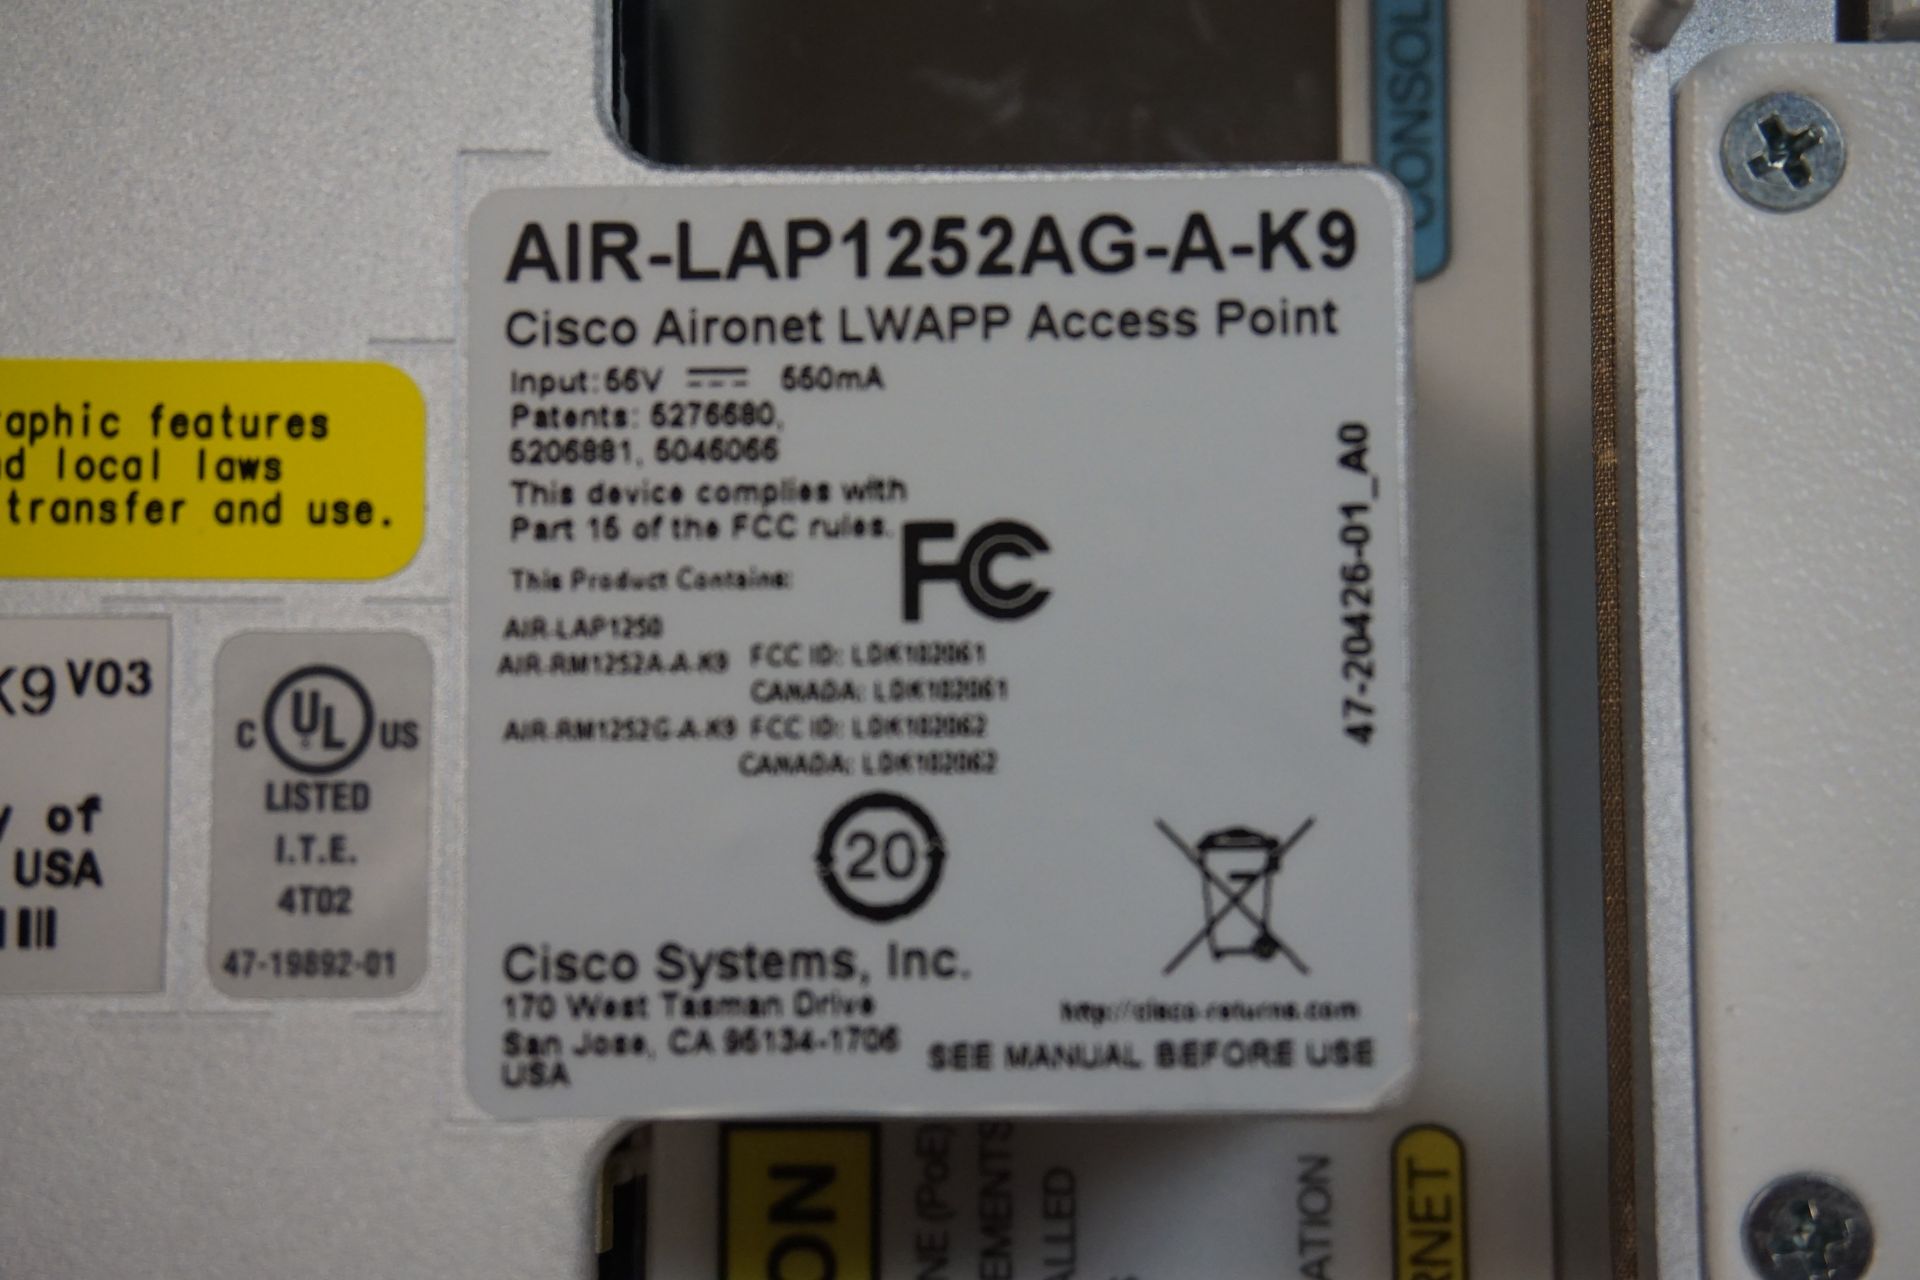 Asst. Cisco Air-AP1852E-A-K9, AIR LAP1252AG-A-K9 AIRONET Accesspoint with (8) Power Injectors - Image 2 of 4